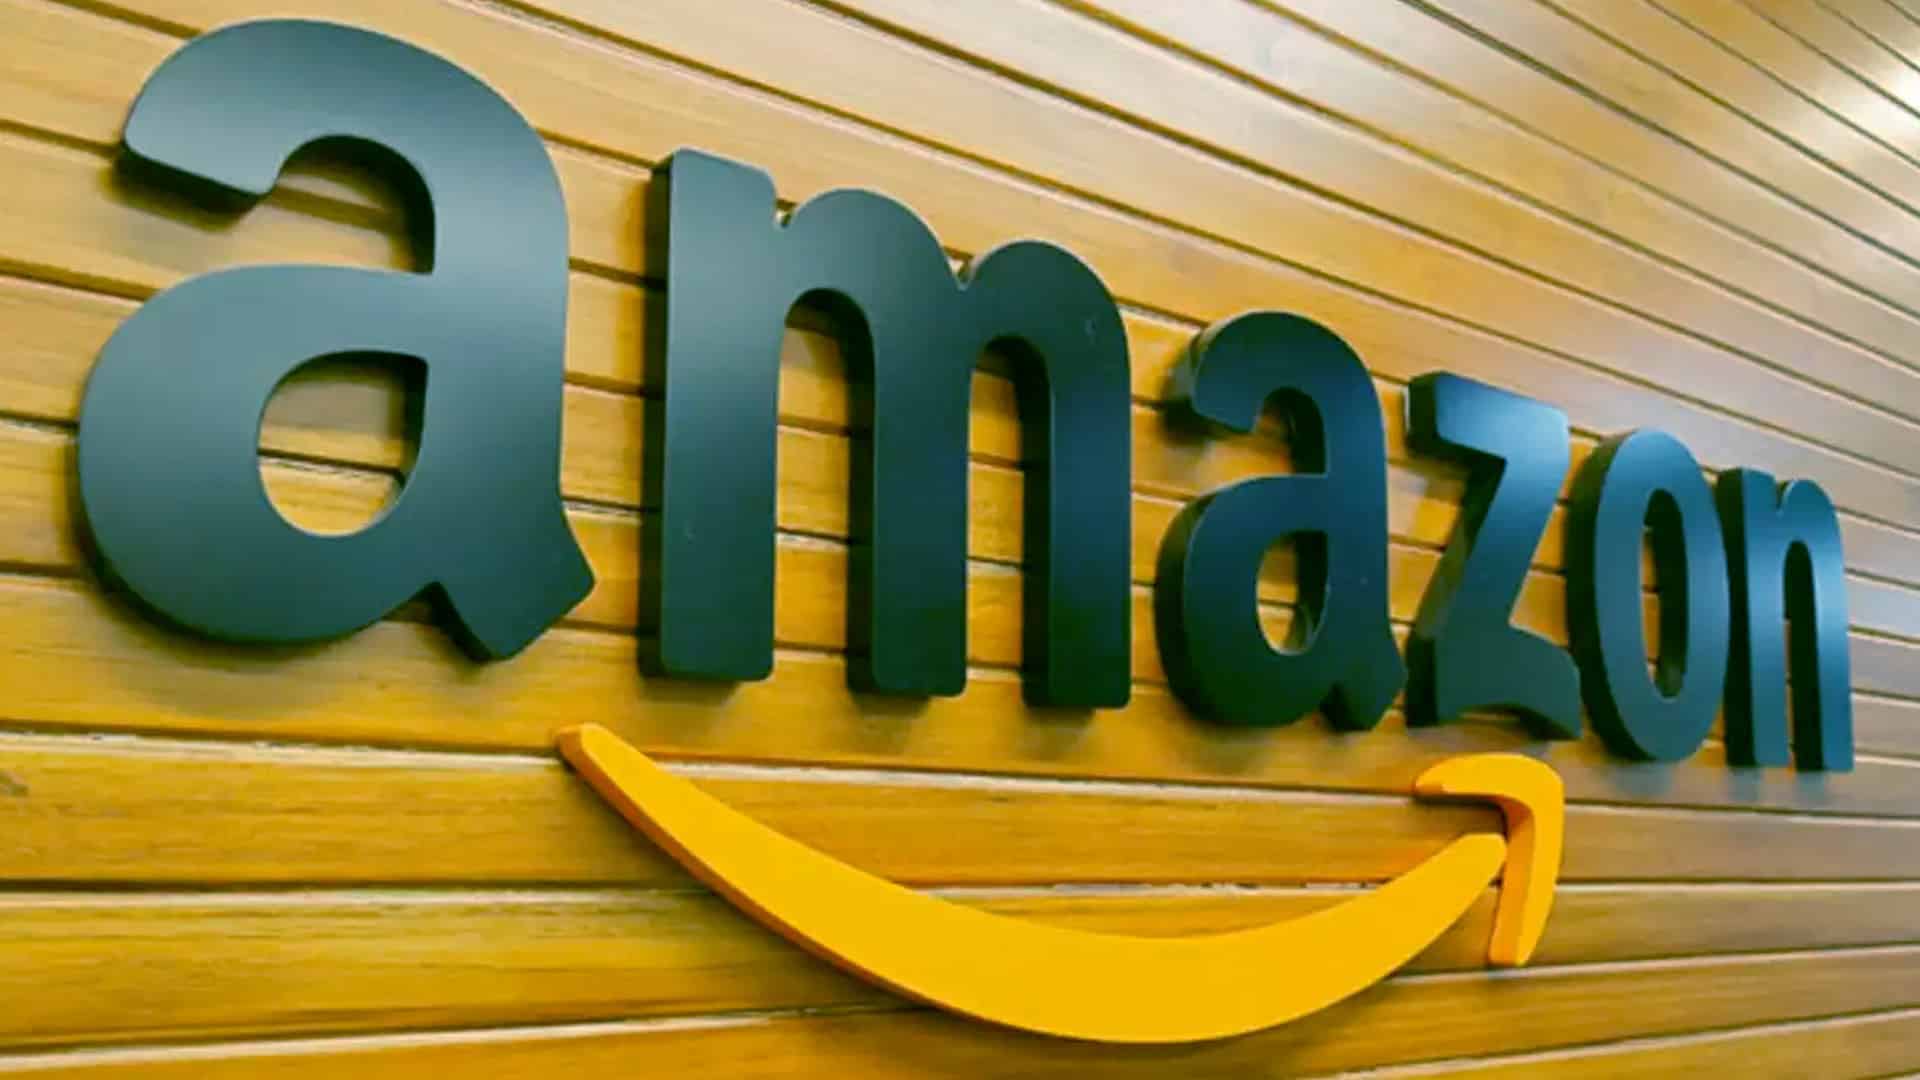 Amazon Business offers exciting deals for MSMEs through end of financial year sale event